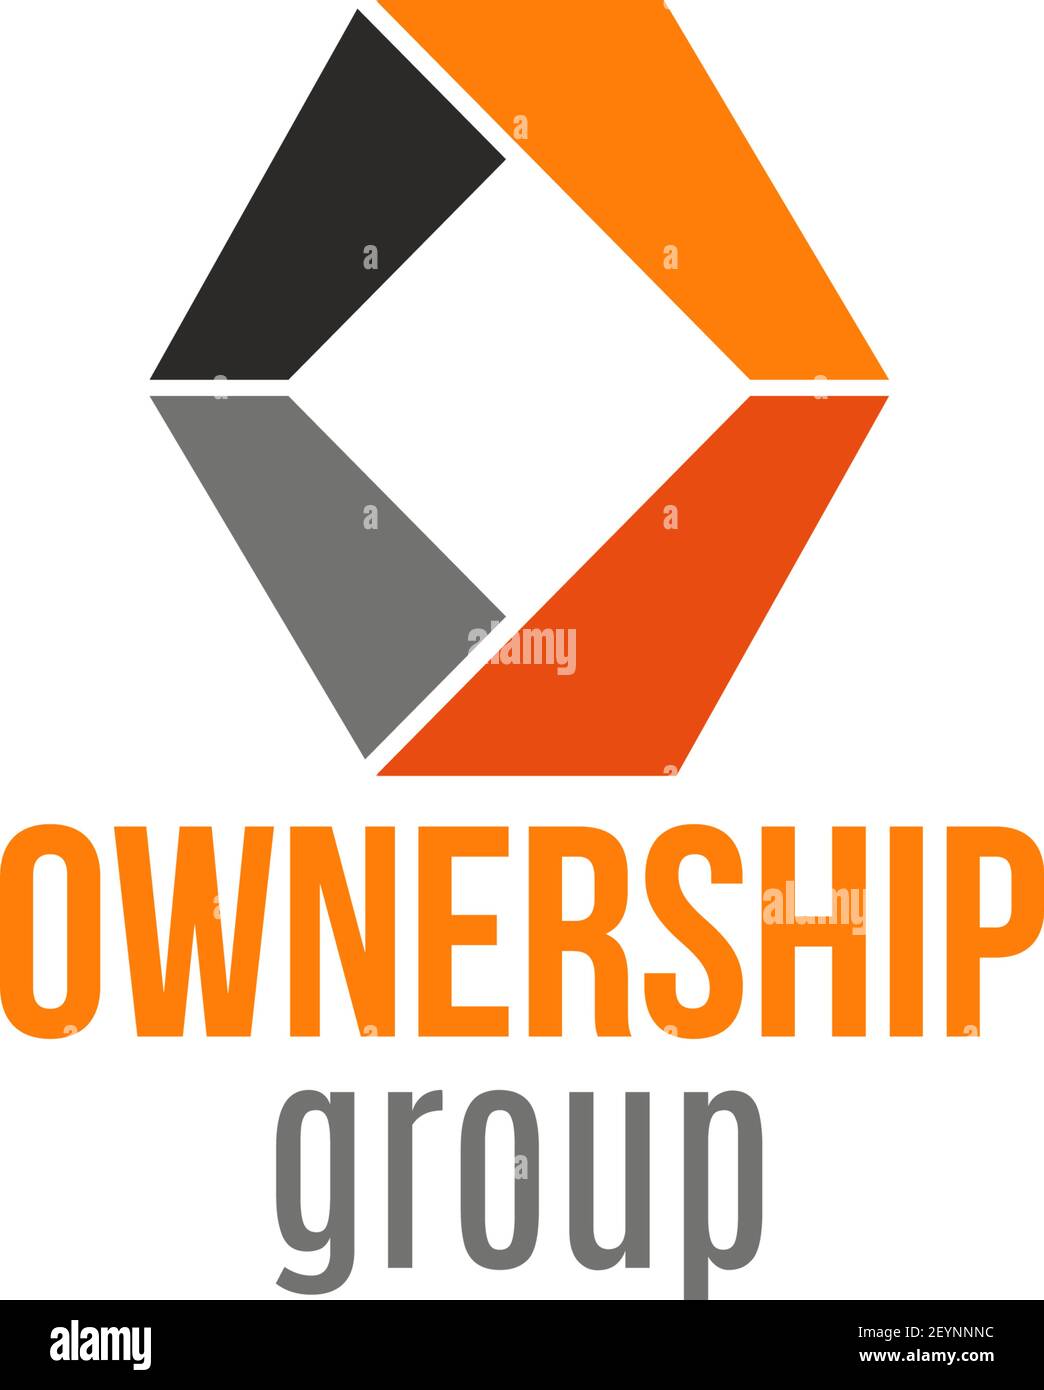 Ownership group vector icon isolated on a white background. Concept of teamwork or partnership between group of companies. Creative badge for business Stock Vector